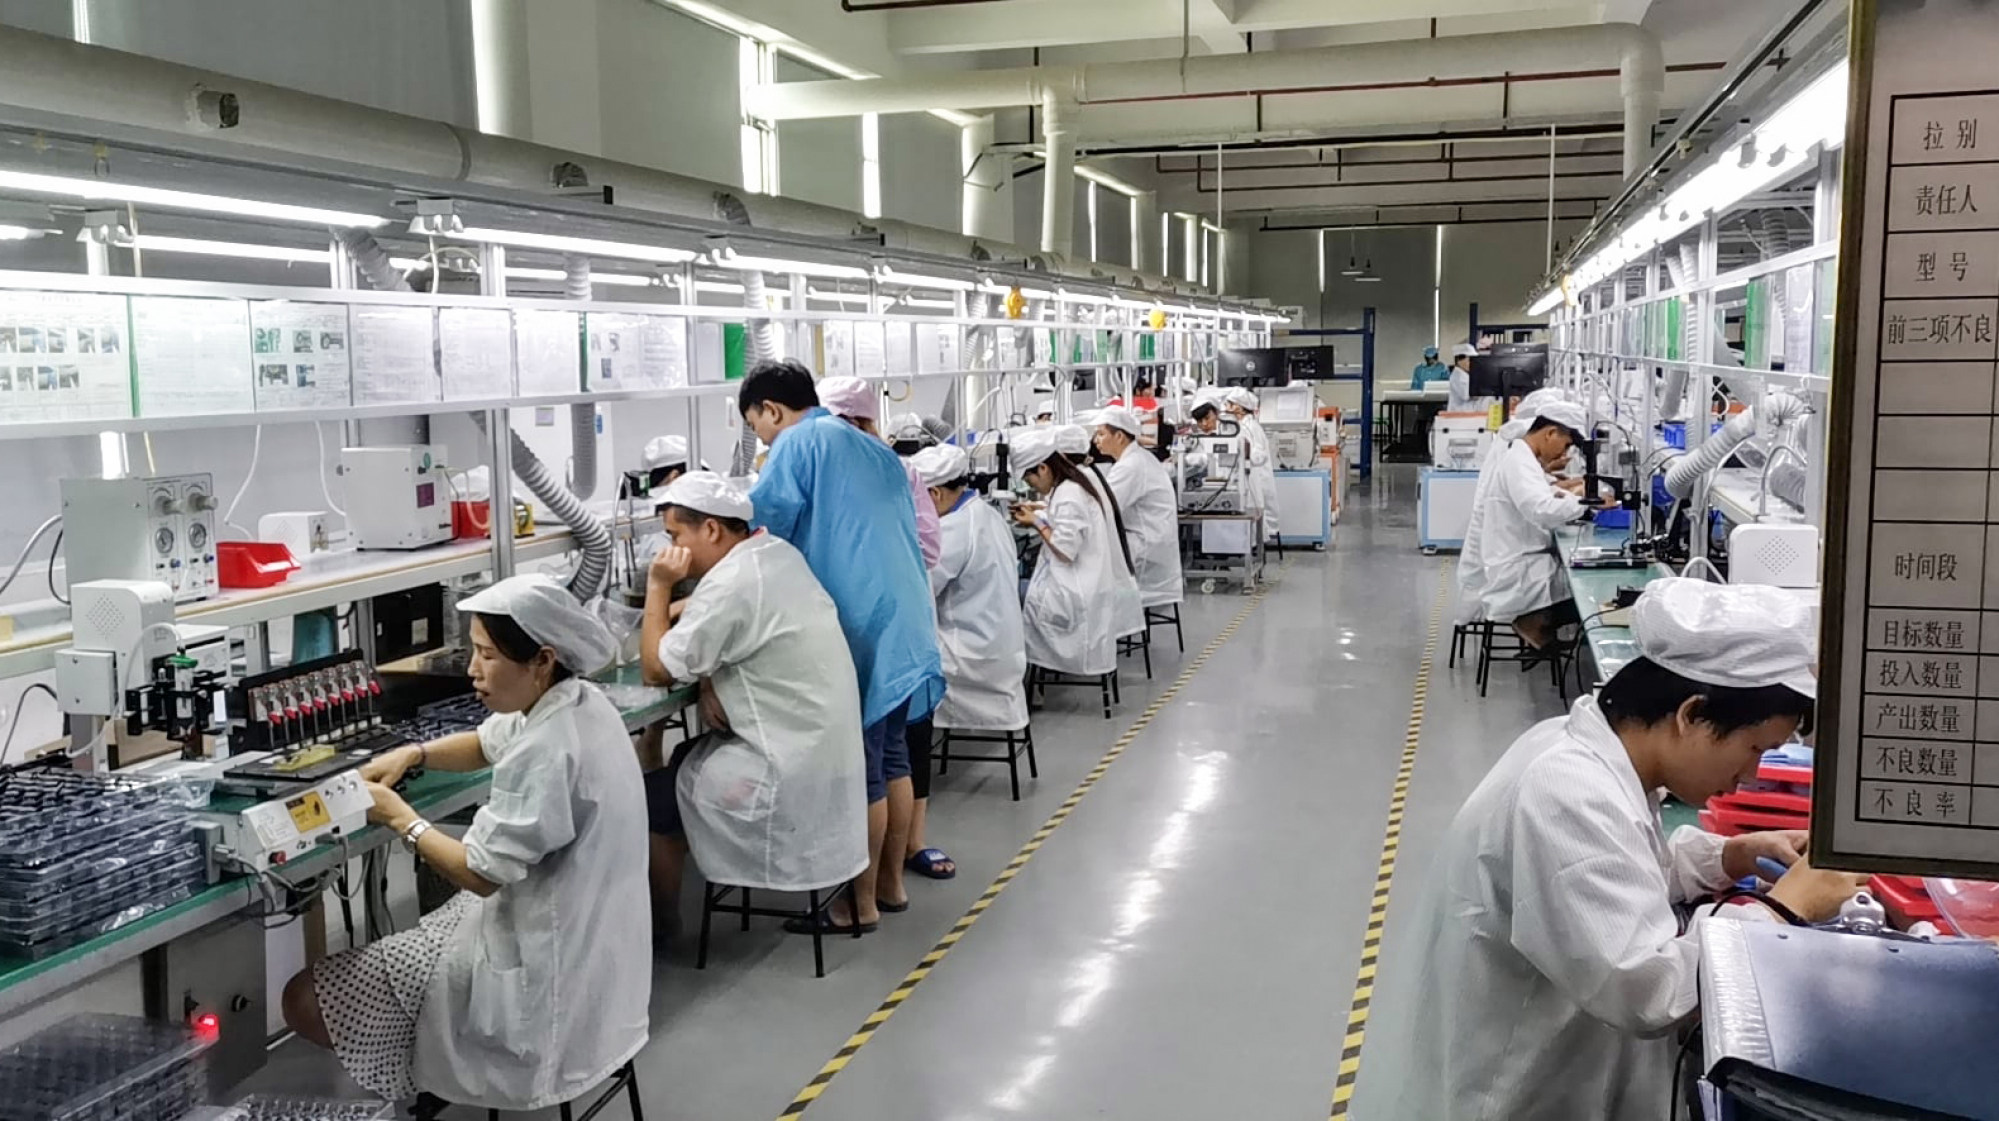 A production line inside the factory of Dongguan Koppo Electronics Co, a major Bluetooth headphone maker in China. Photo: Handout